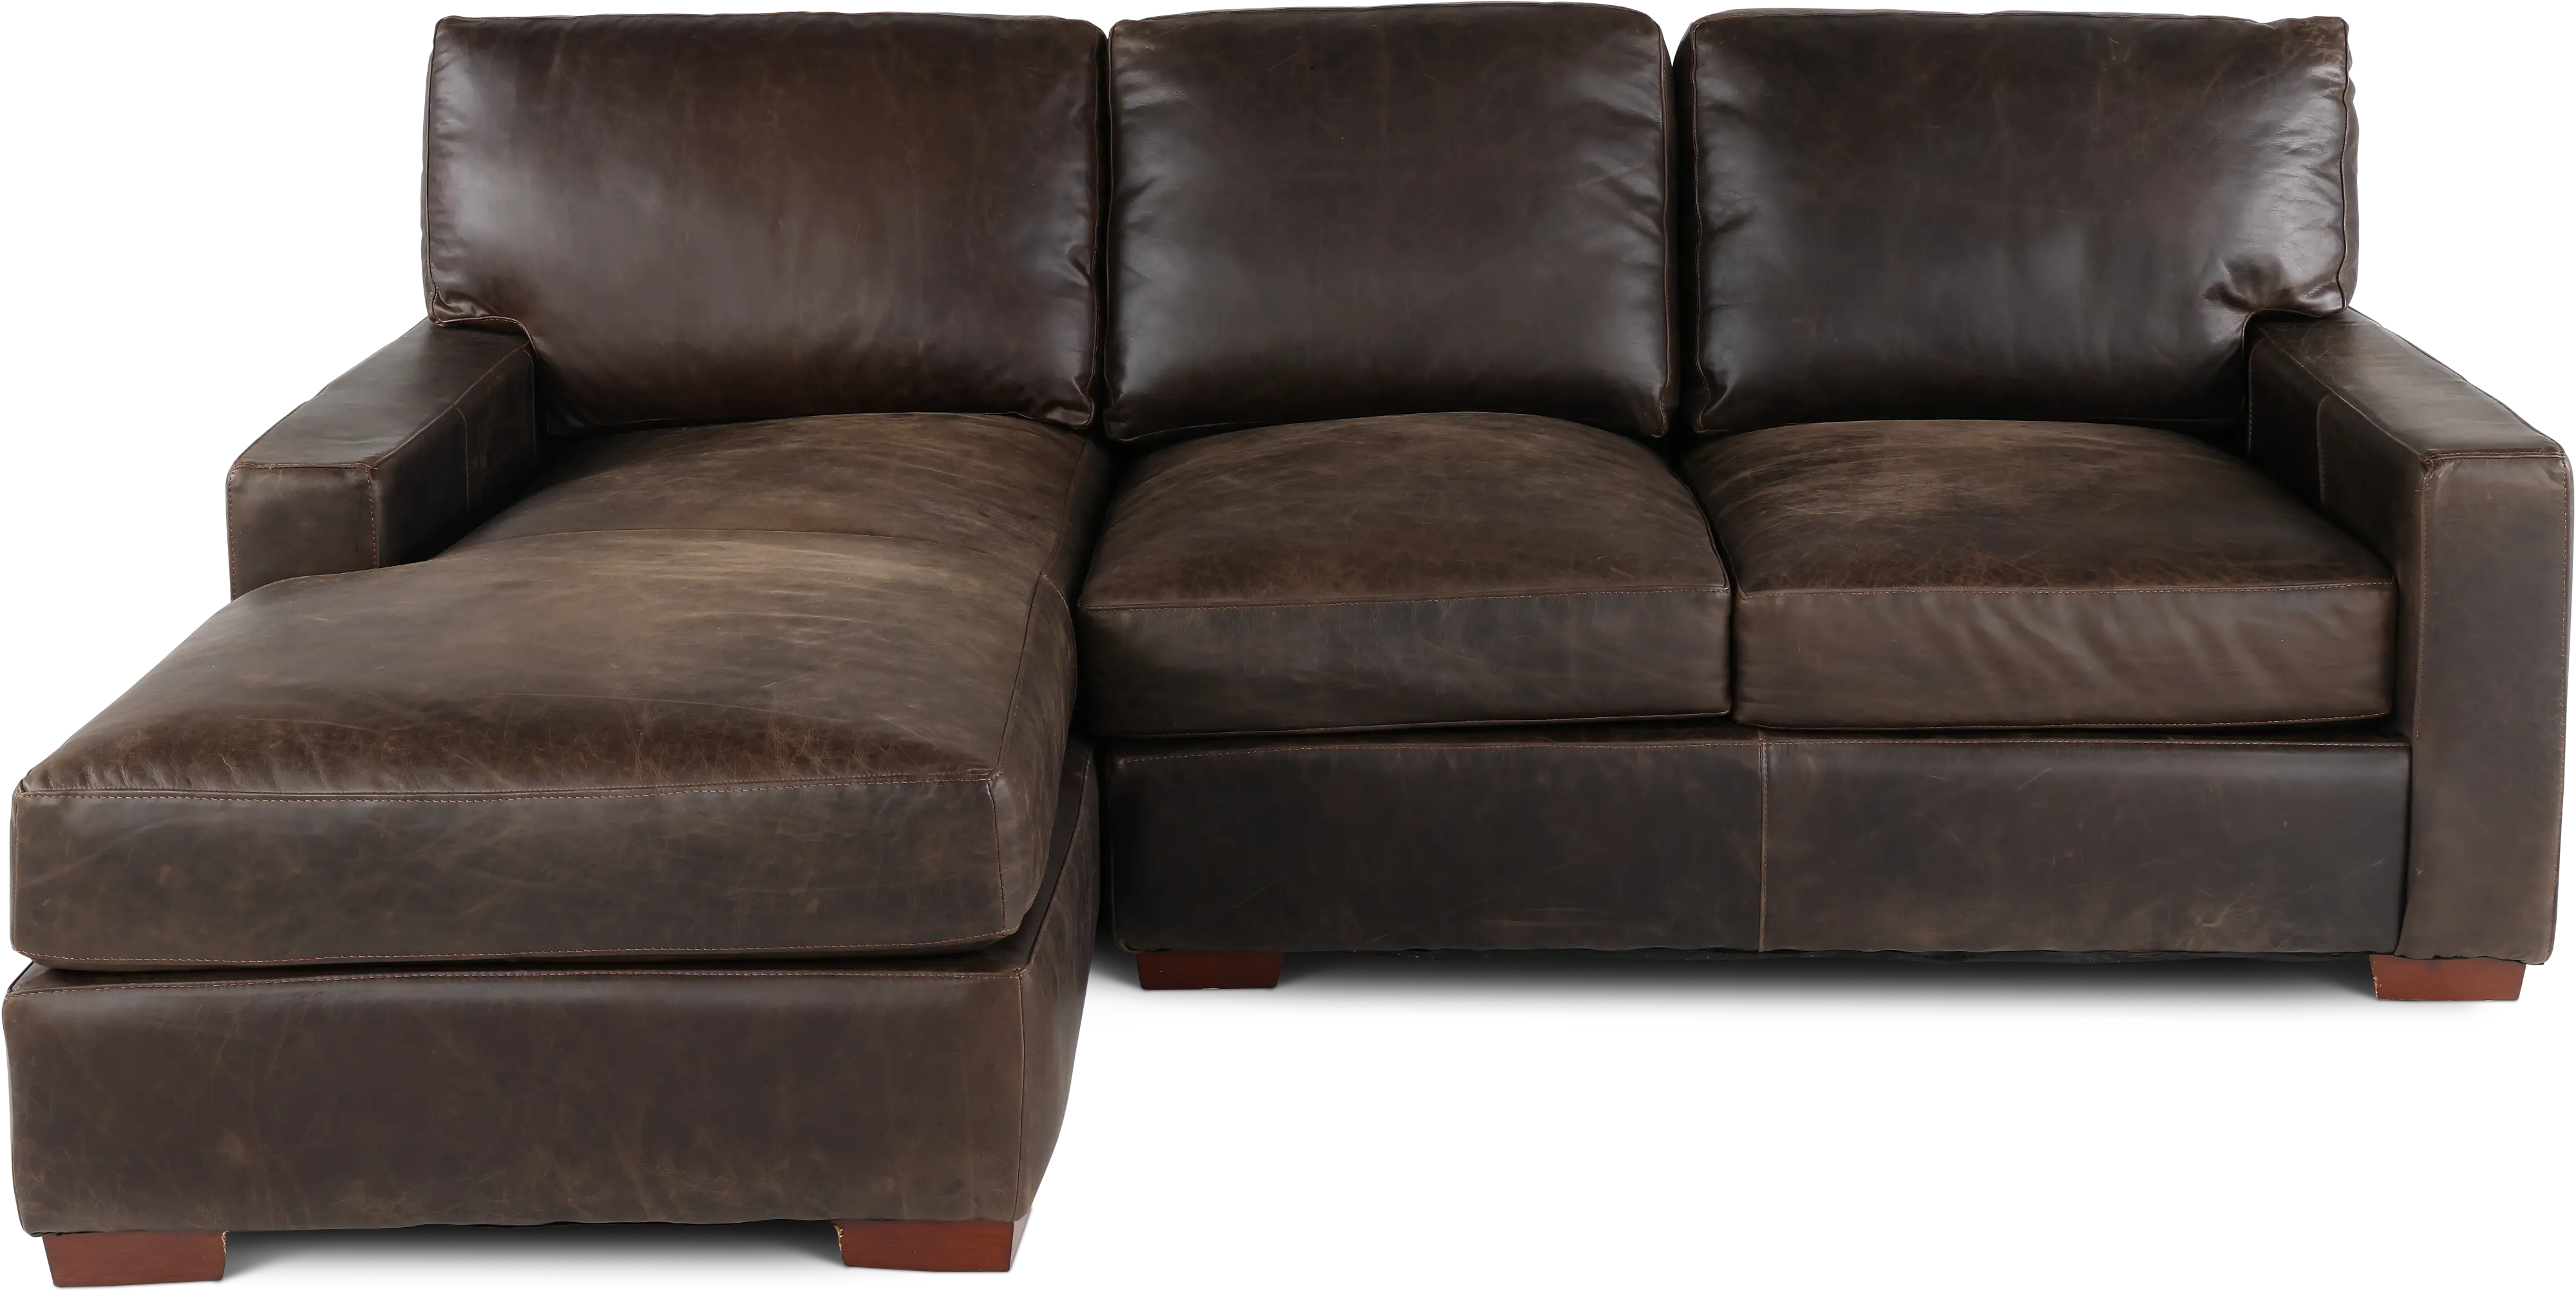 Mayfair Java Brown Leather 2 Piece Sectional